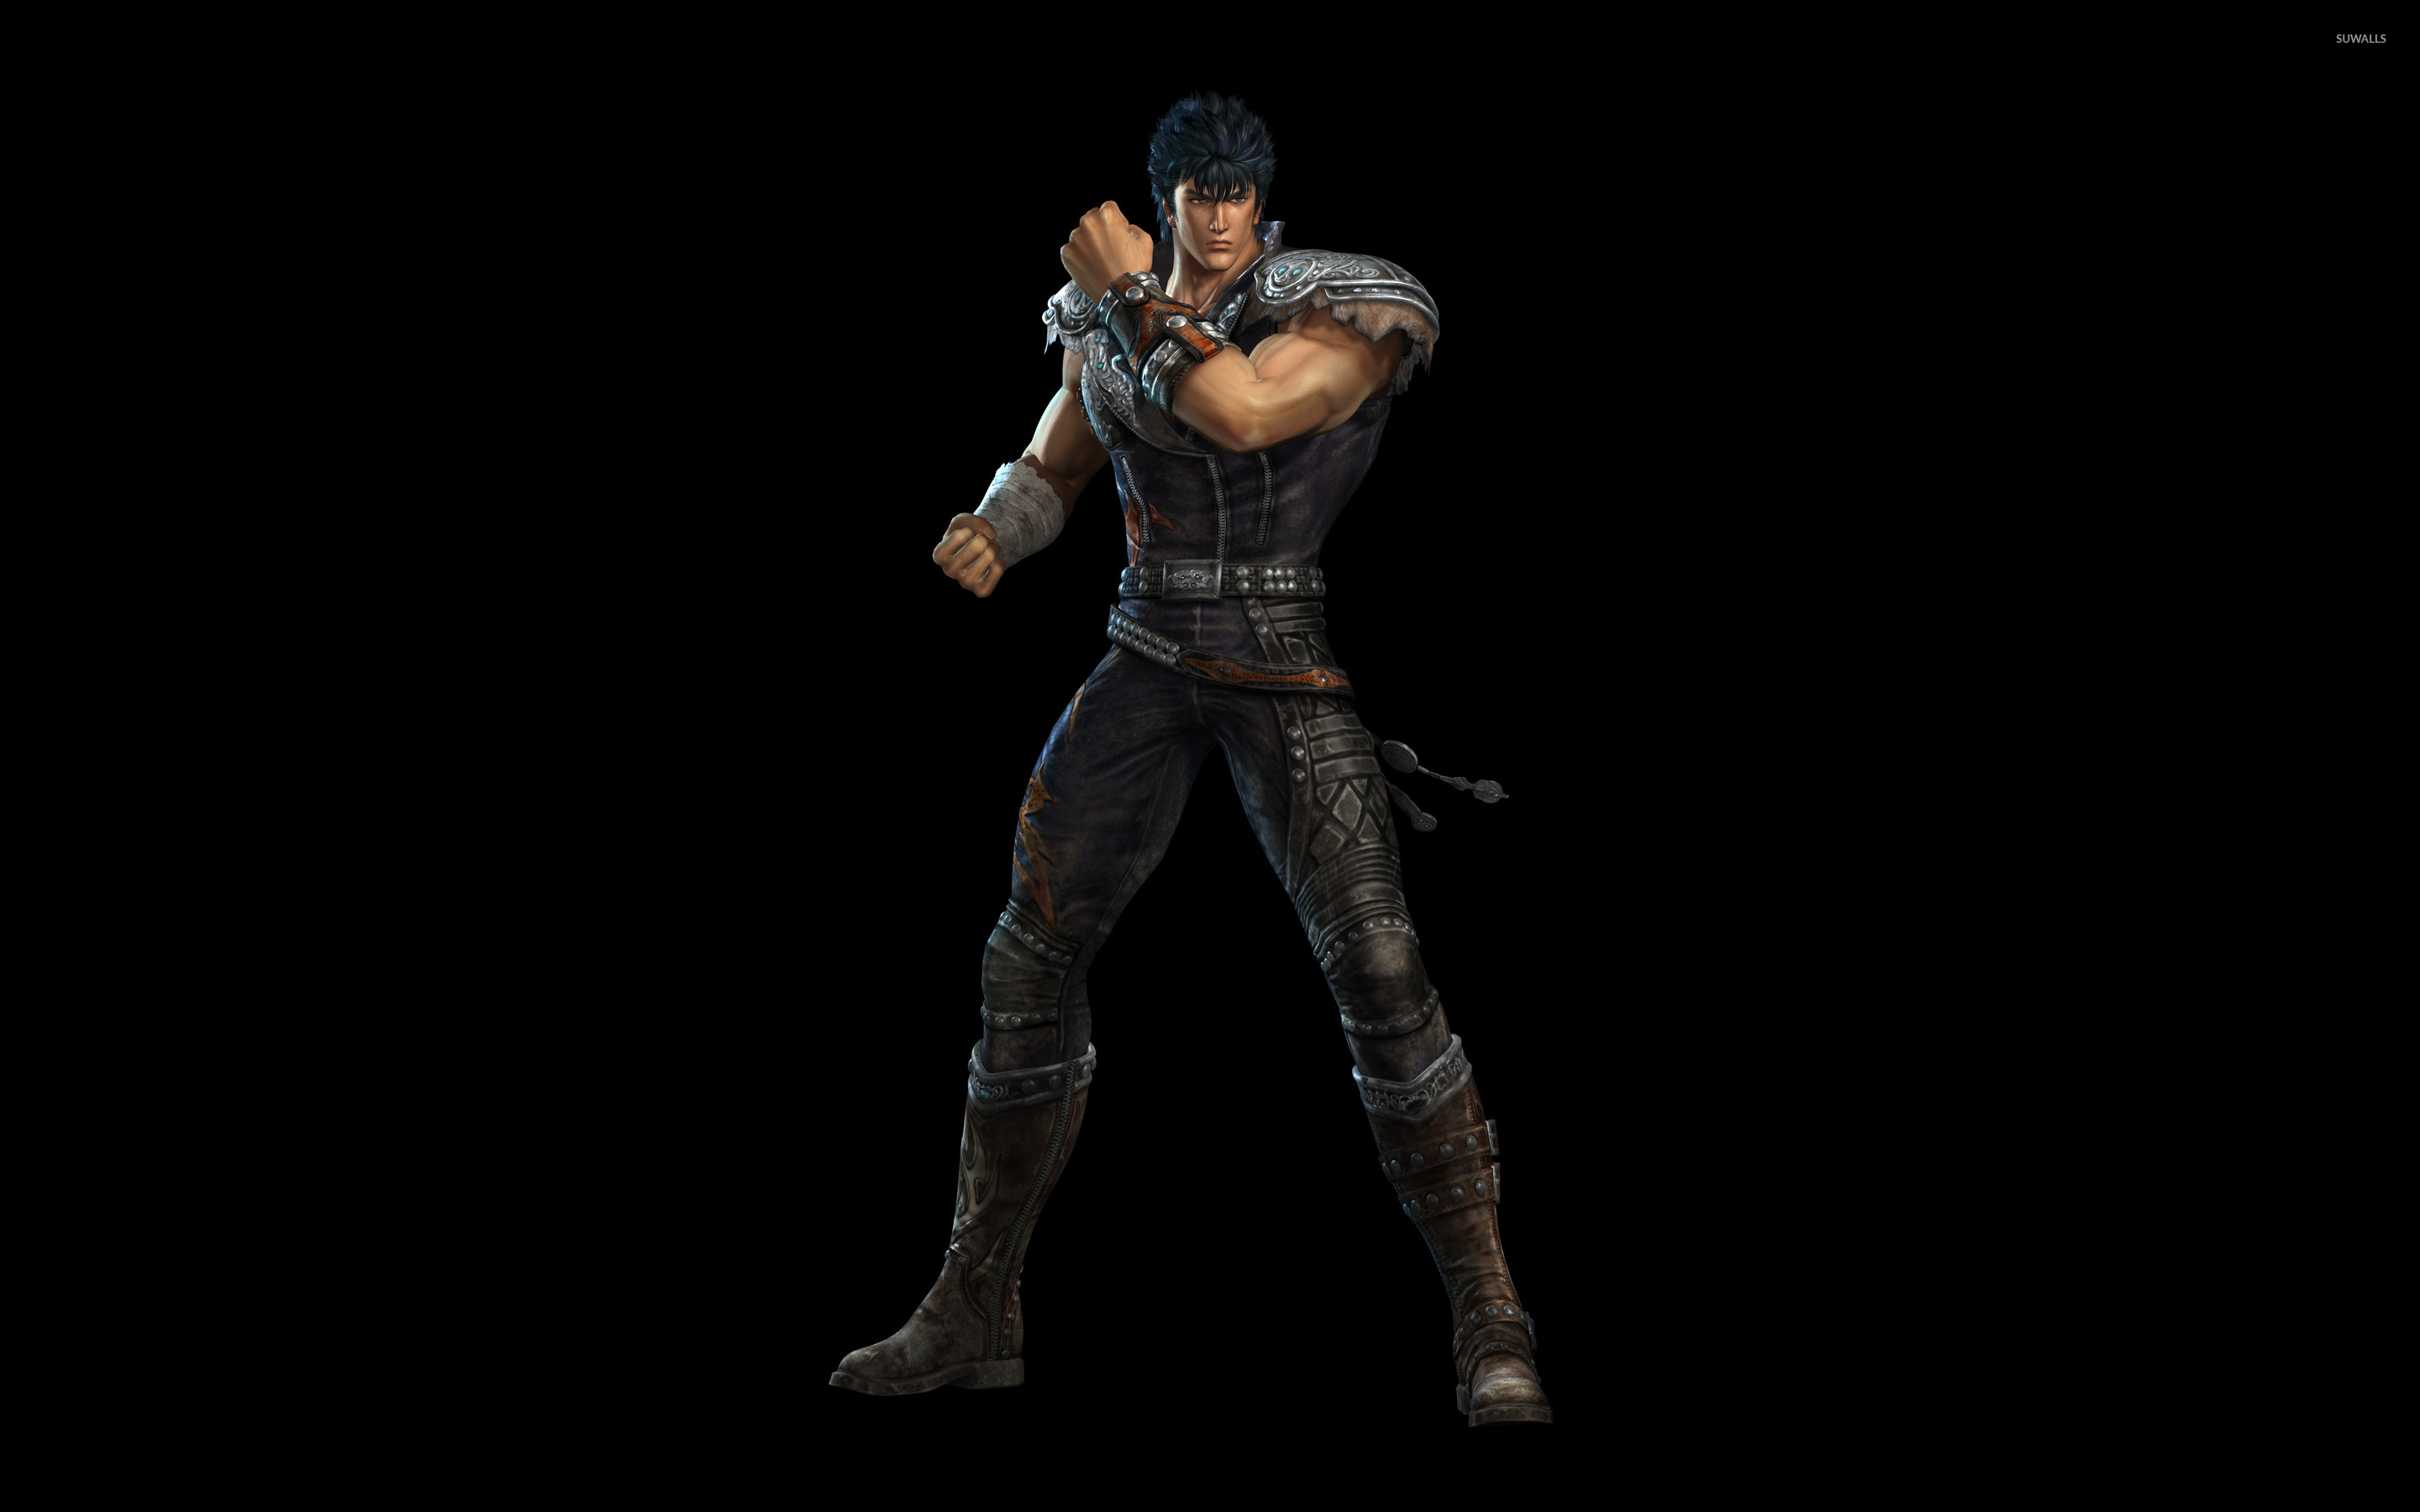 Kenshiro   Fist of the North Star Kens Rage 2 wallpaper   Game